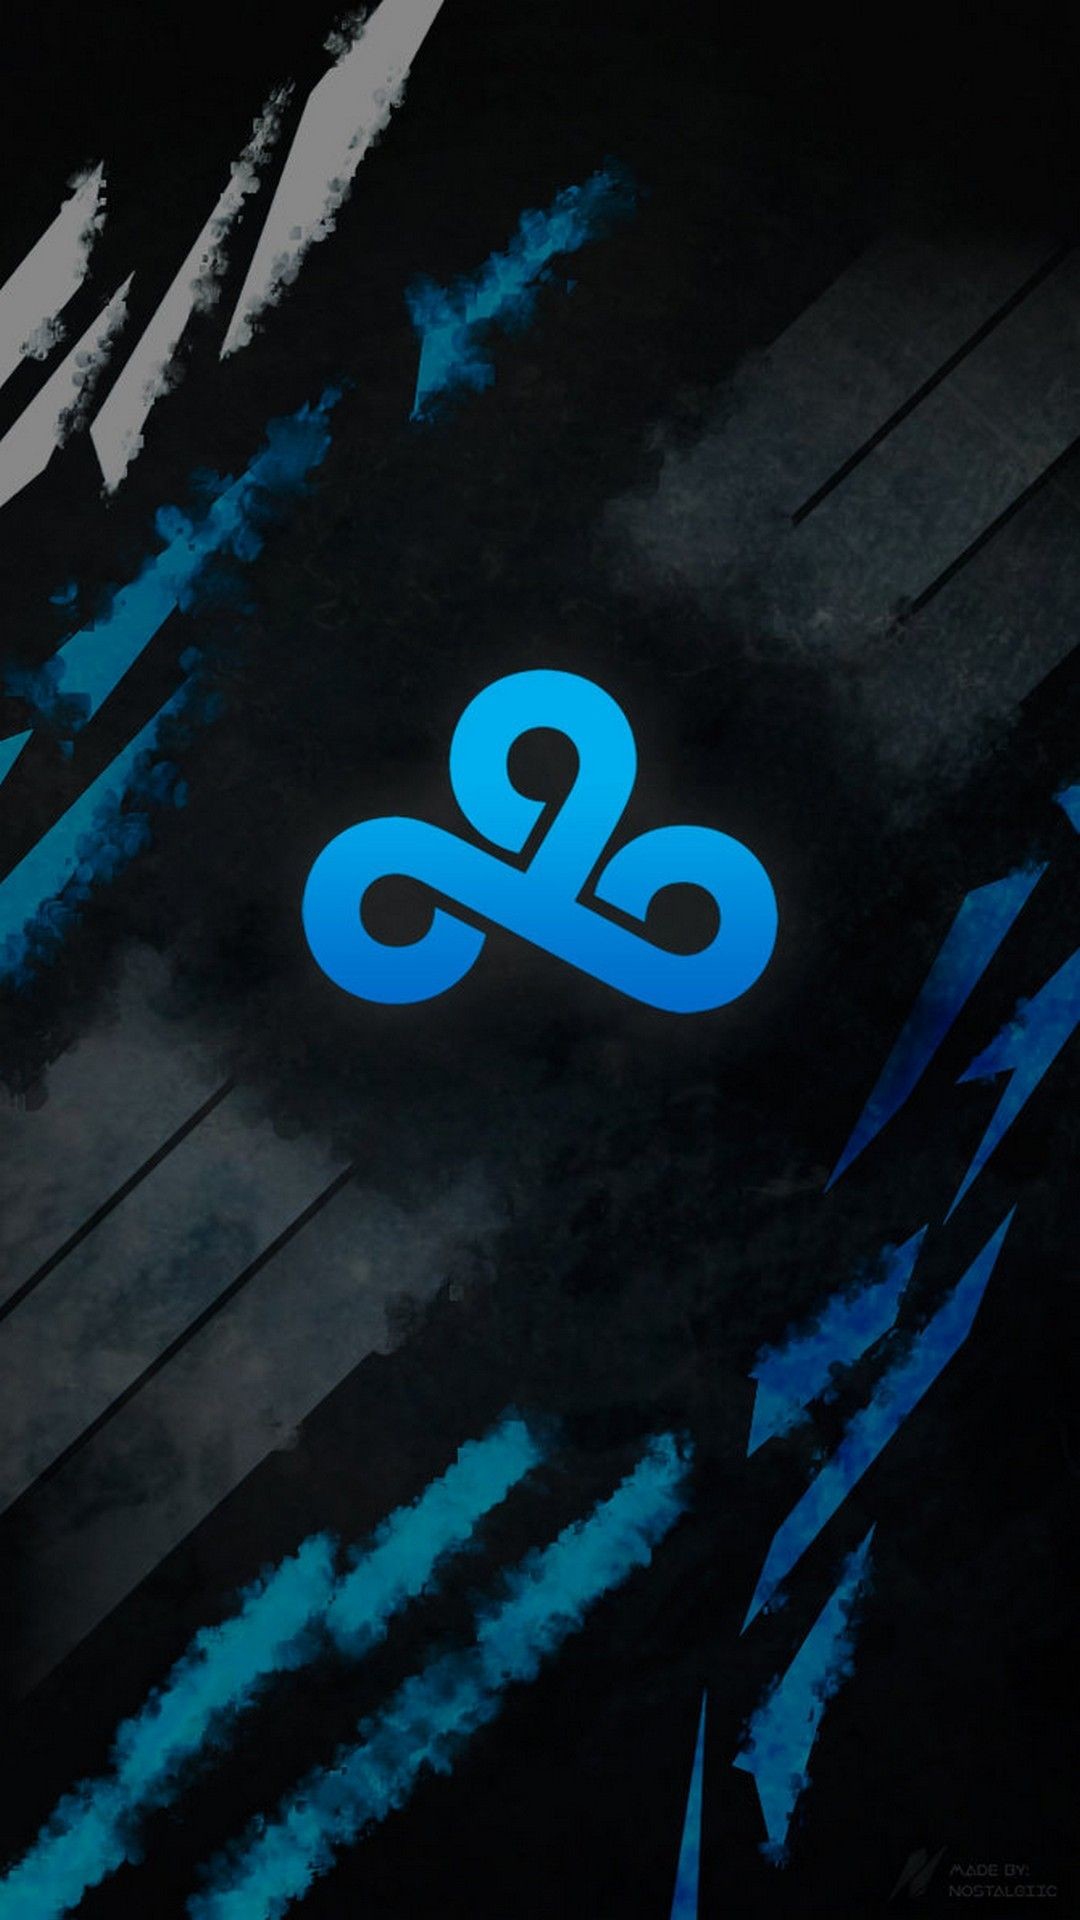 1080x1920, Iphone 8 Wallpaper Cloud 9 Games - Gaming Wallpaper For Android - HD Wallpaper 